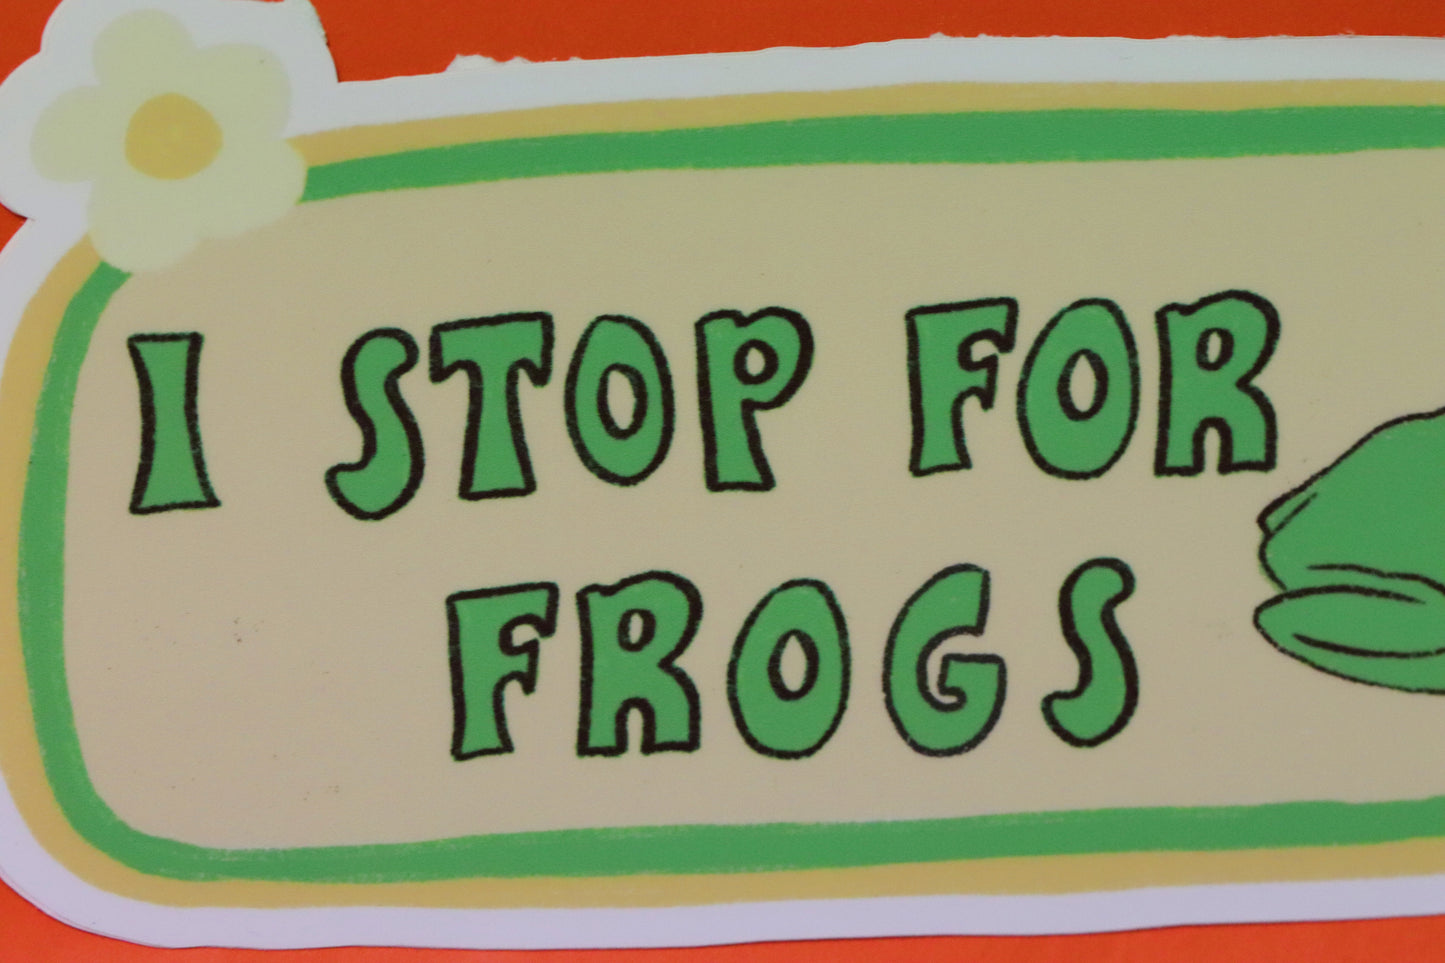 I STOP FOR FROGS 🐸 Bumper Sticker